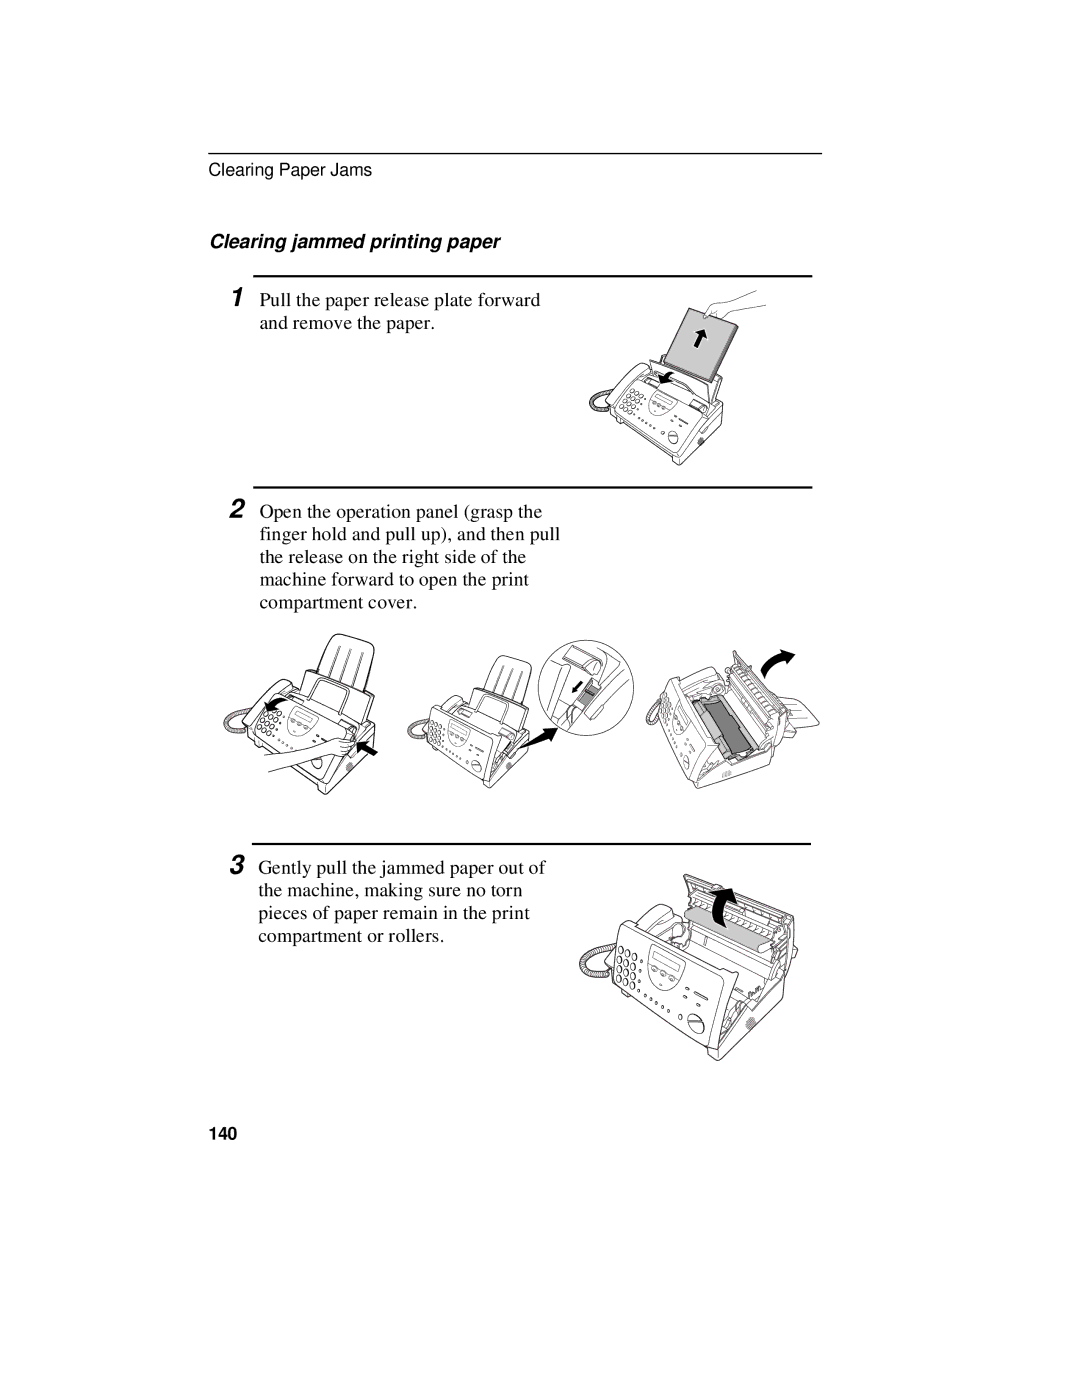 Sharp UX-470 operation manual Clearing jammed printing paper, 140 